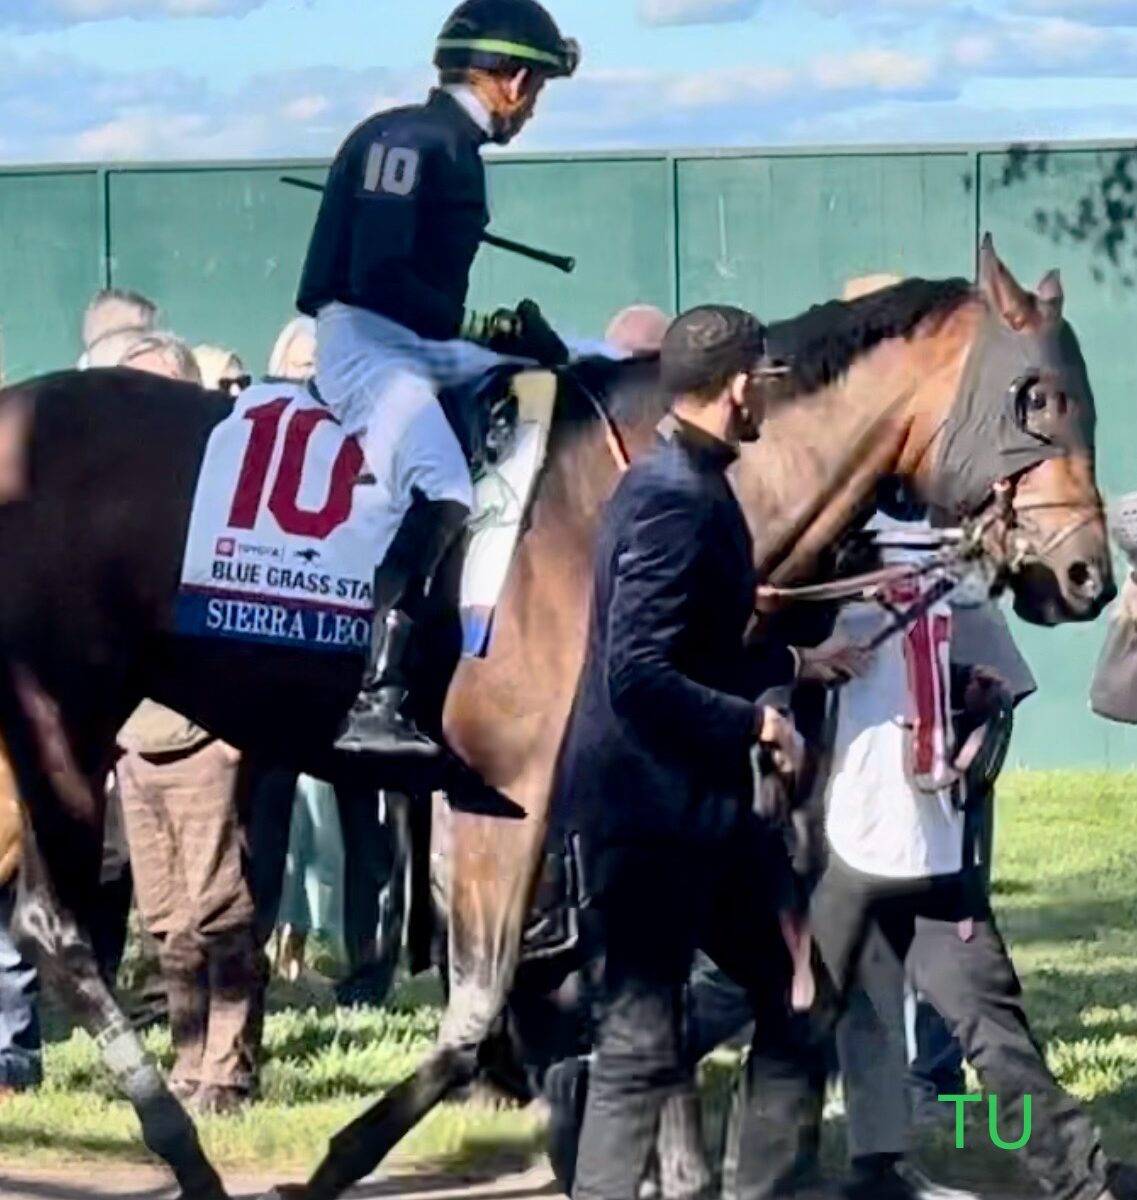 Sierra Leone was first in the Blue Grass Stakes and second in the Kentucky Derby. He's a likely choice to win the Belmont Stakes.